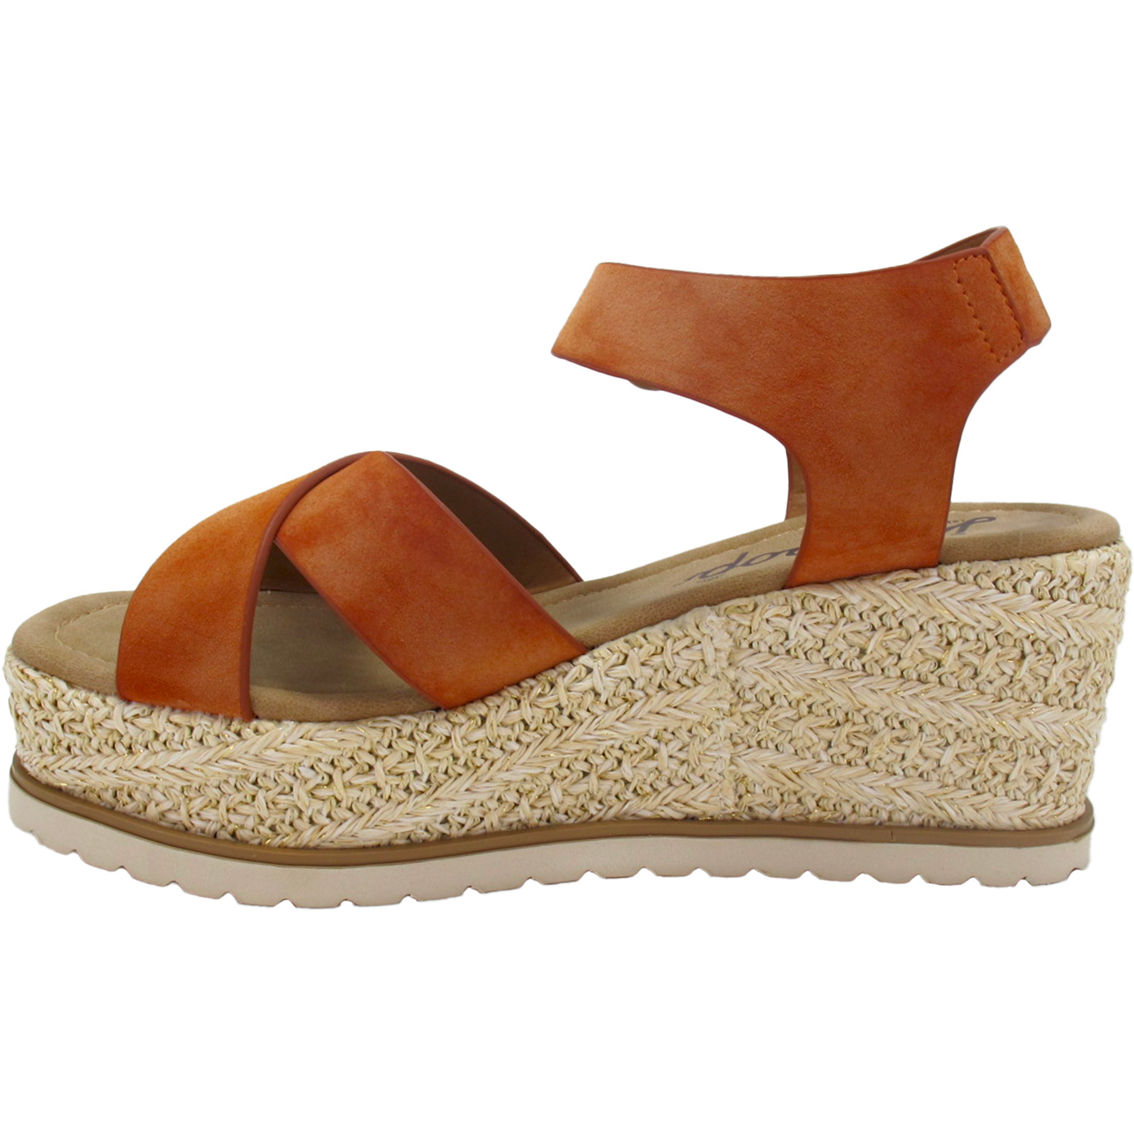 Jellypop Cameo Sandals - Image 3 of 6